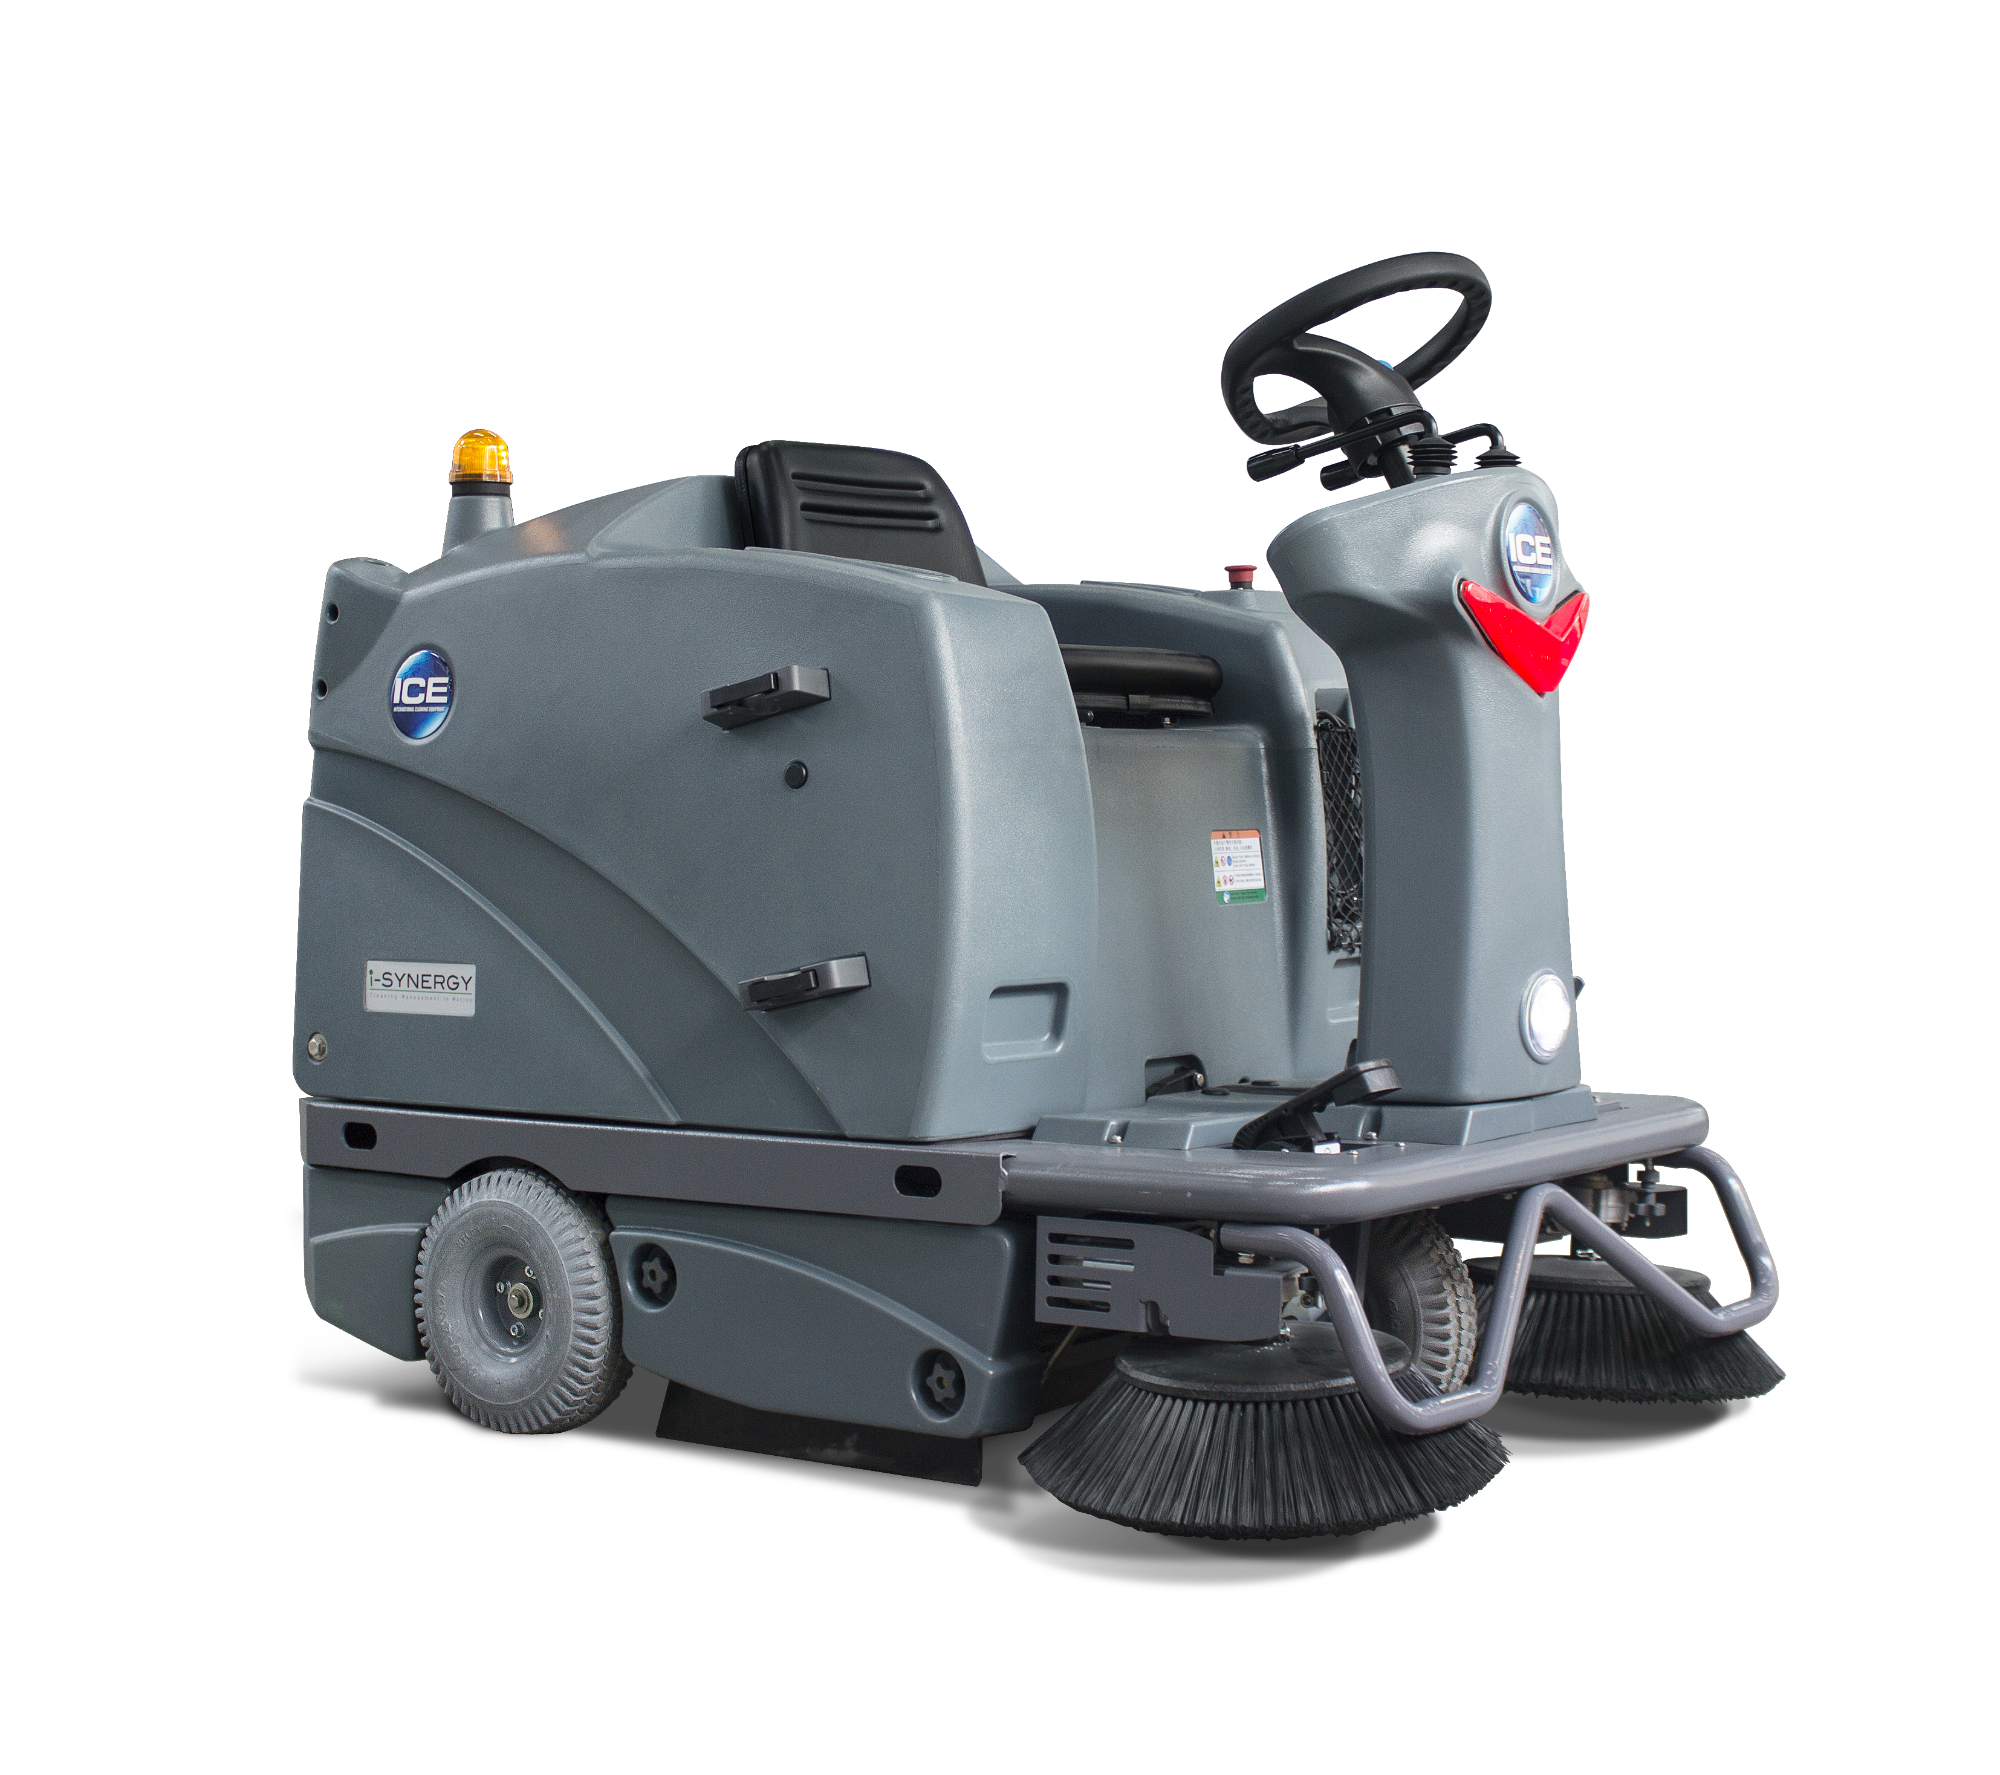 is1100 / is1100L Ride On Sweeper